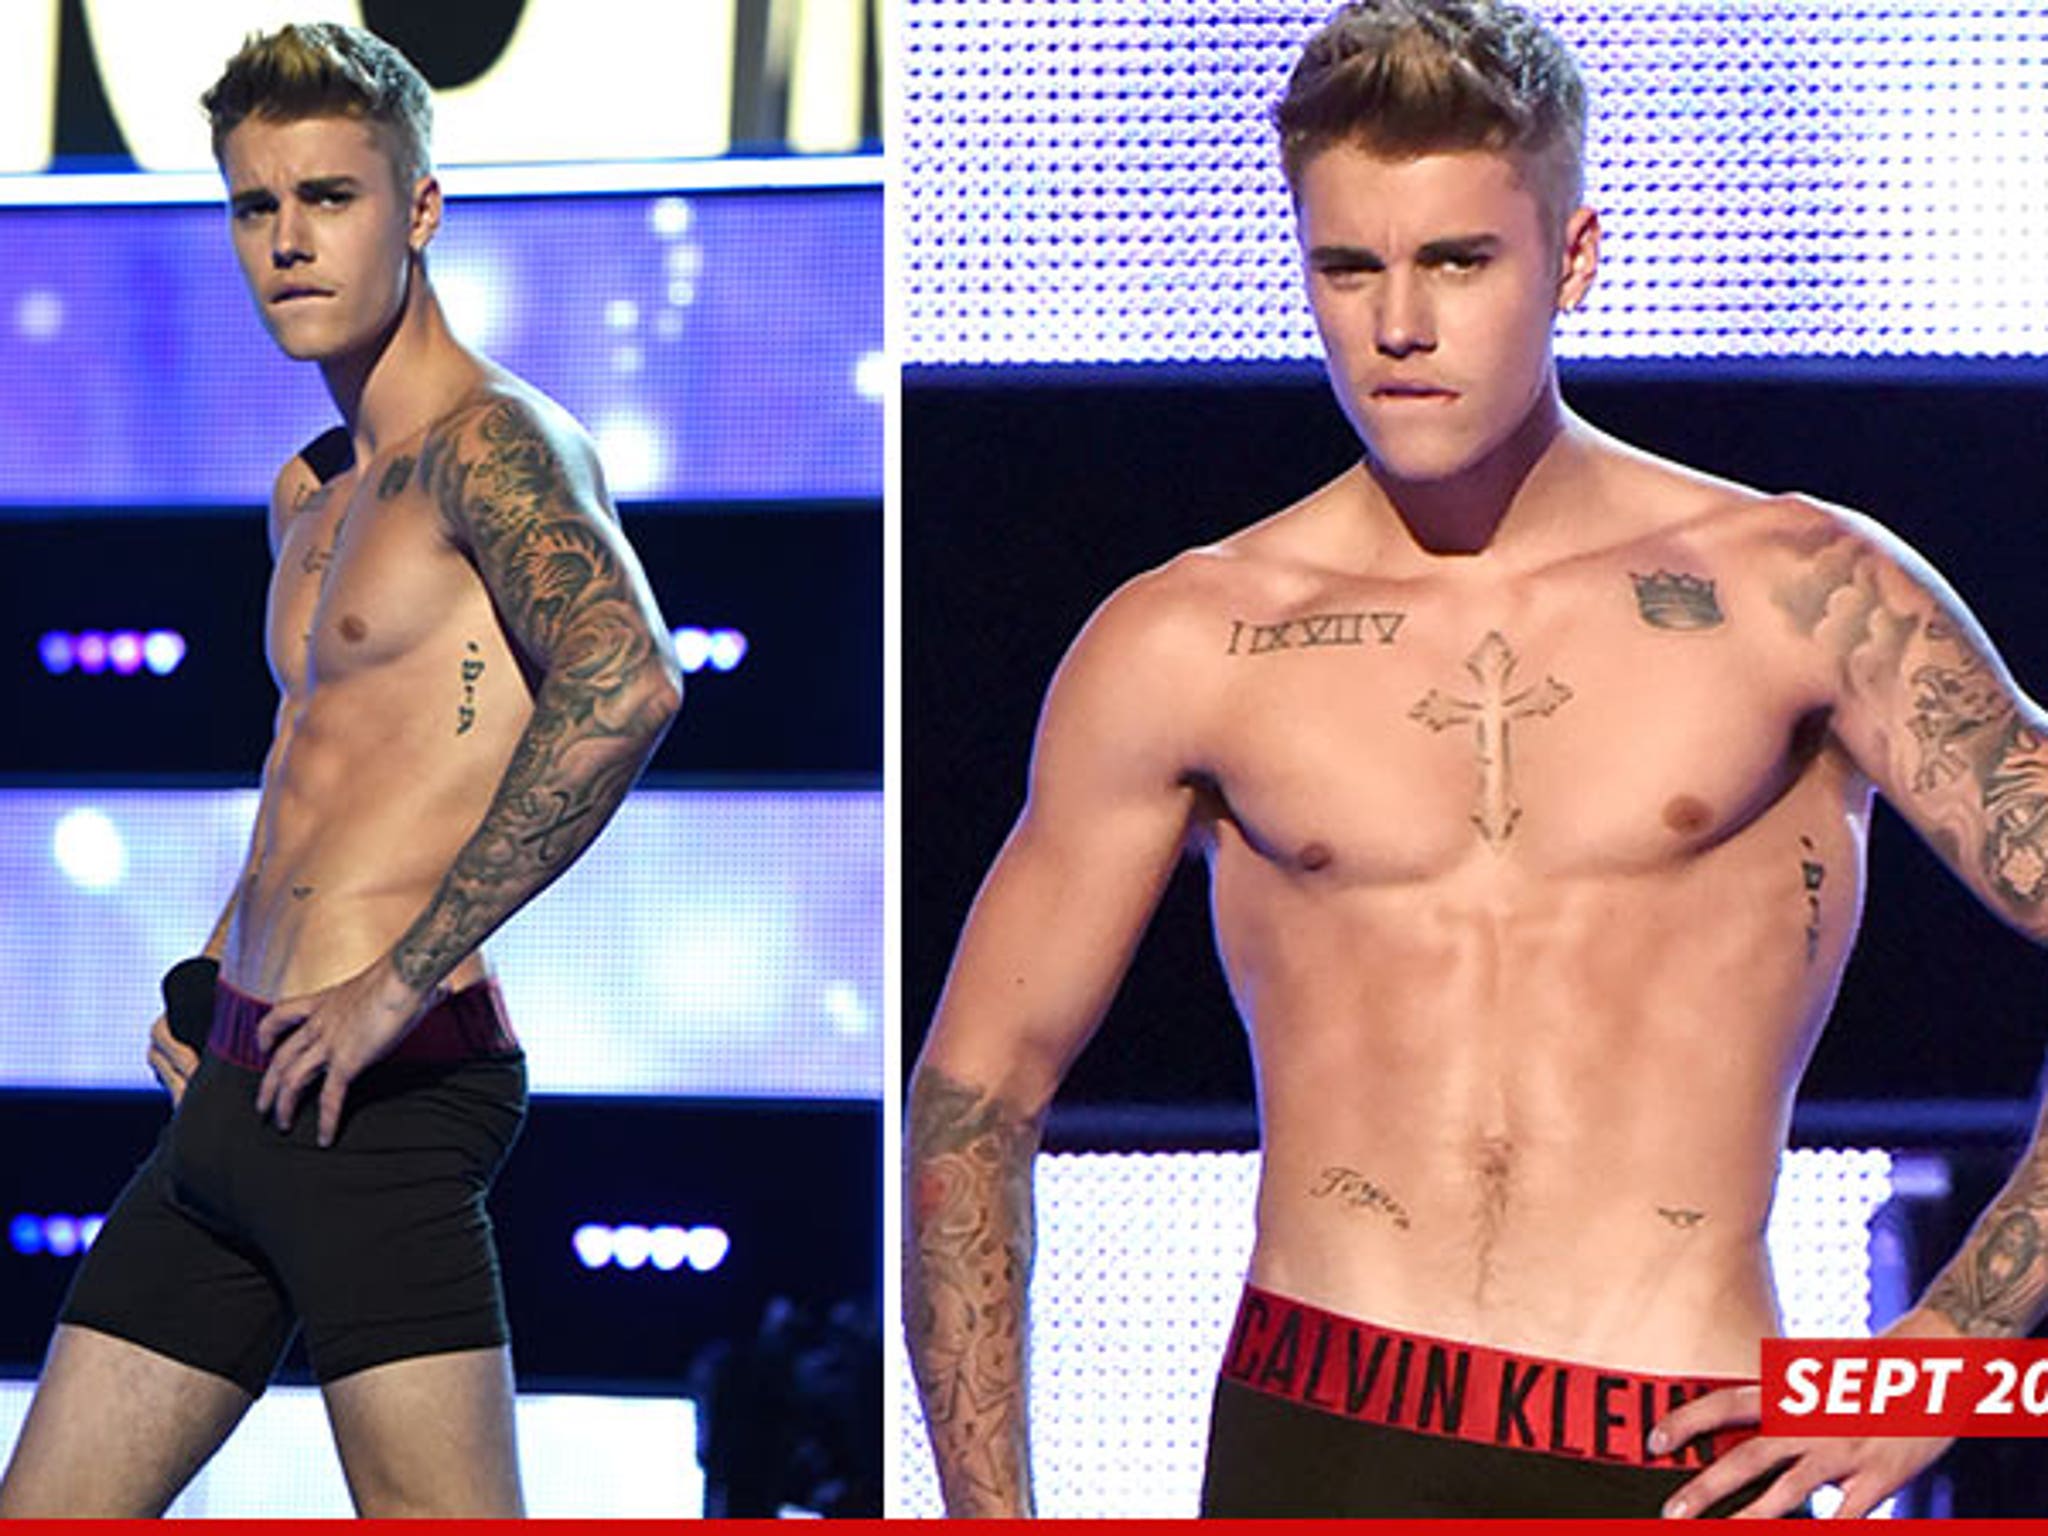 justin bieber before and after calvin klein